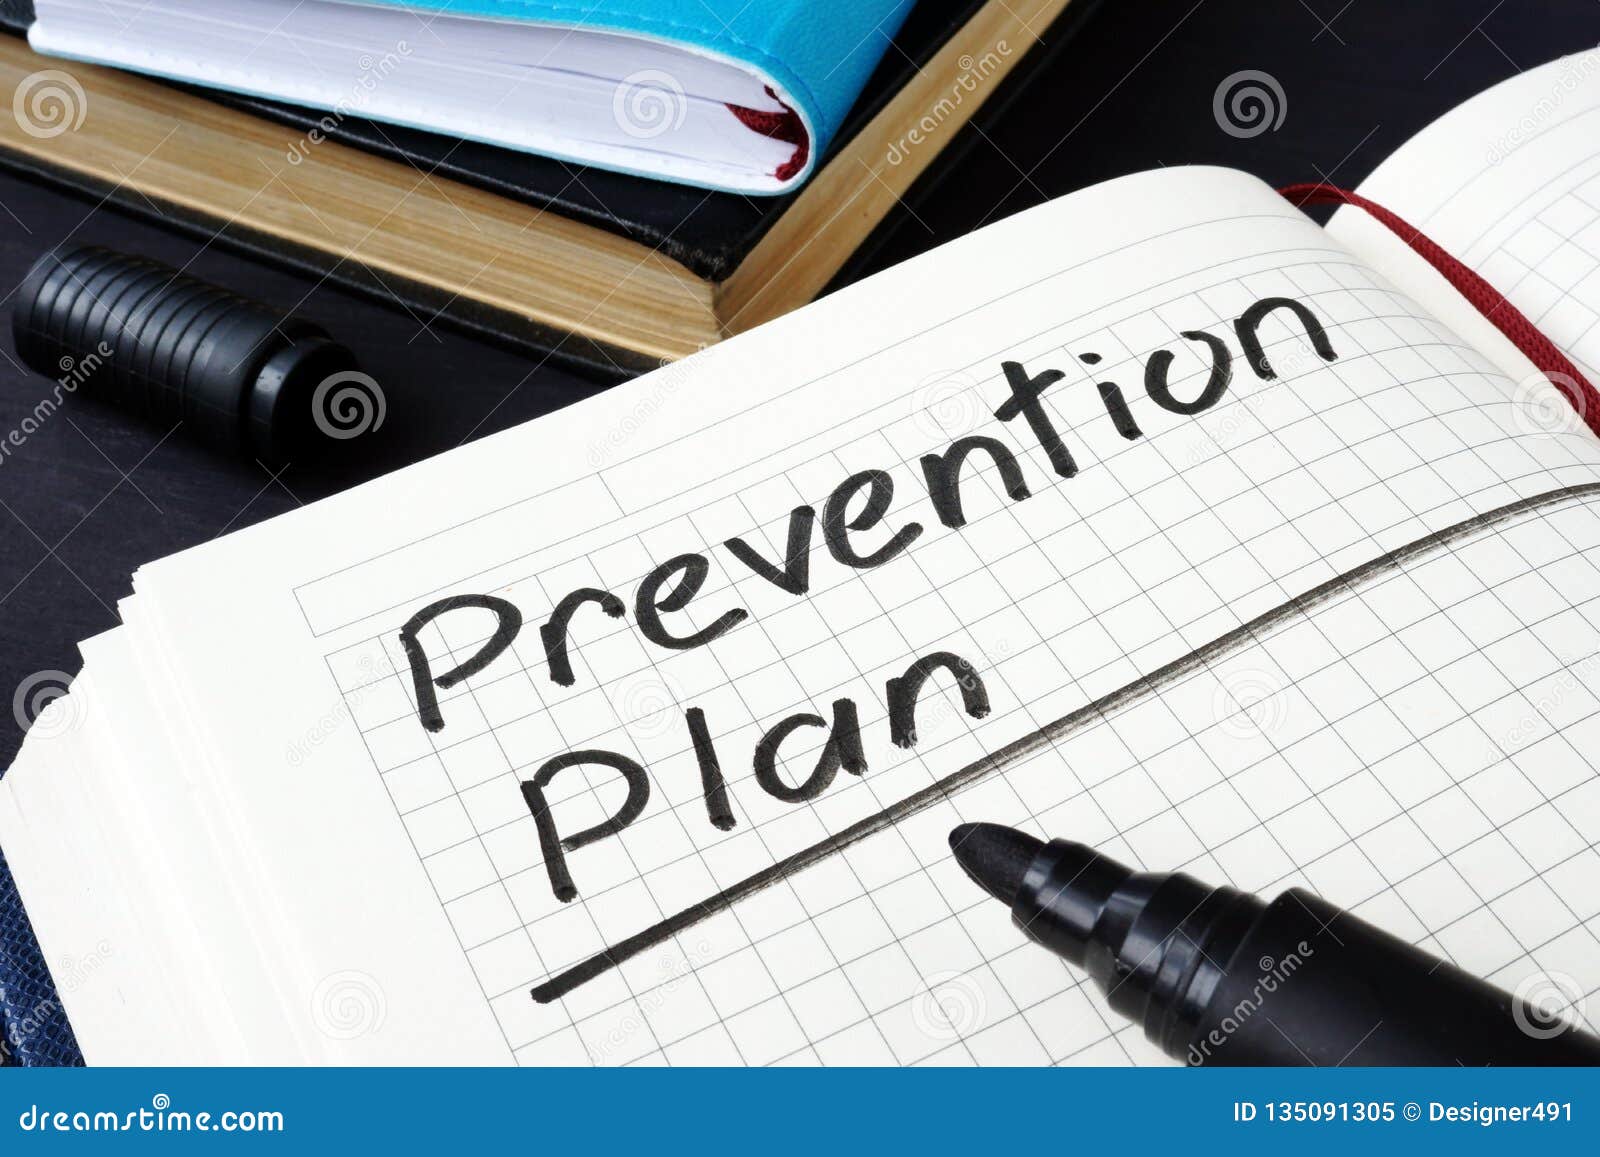 prevention plan written in a note pad.